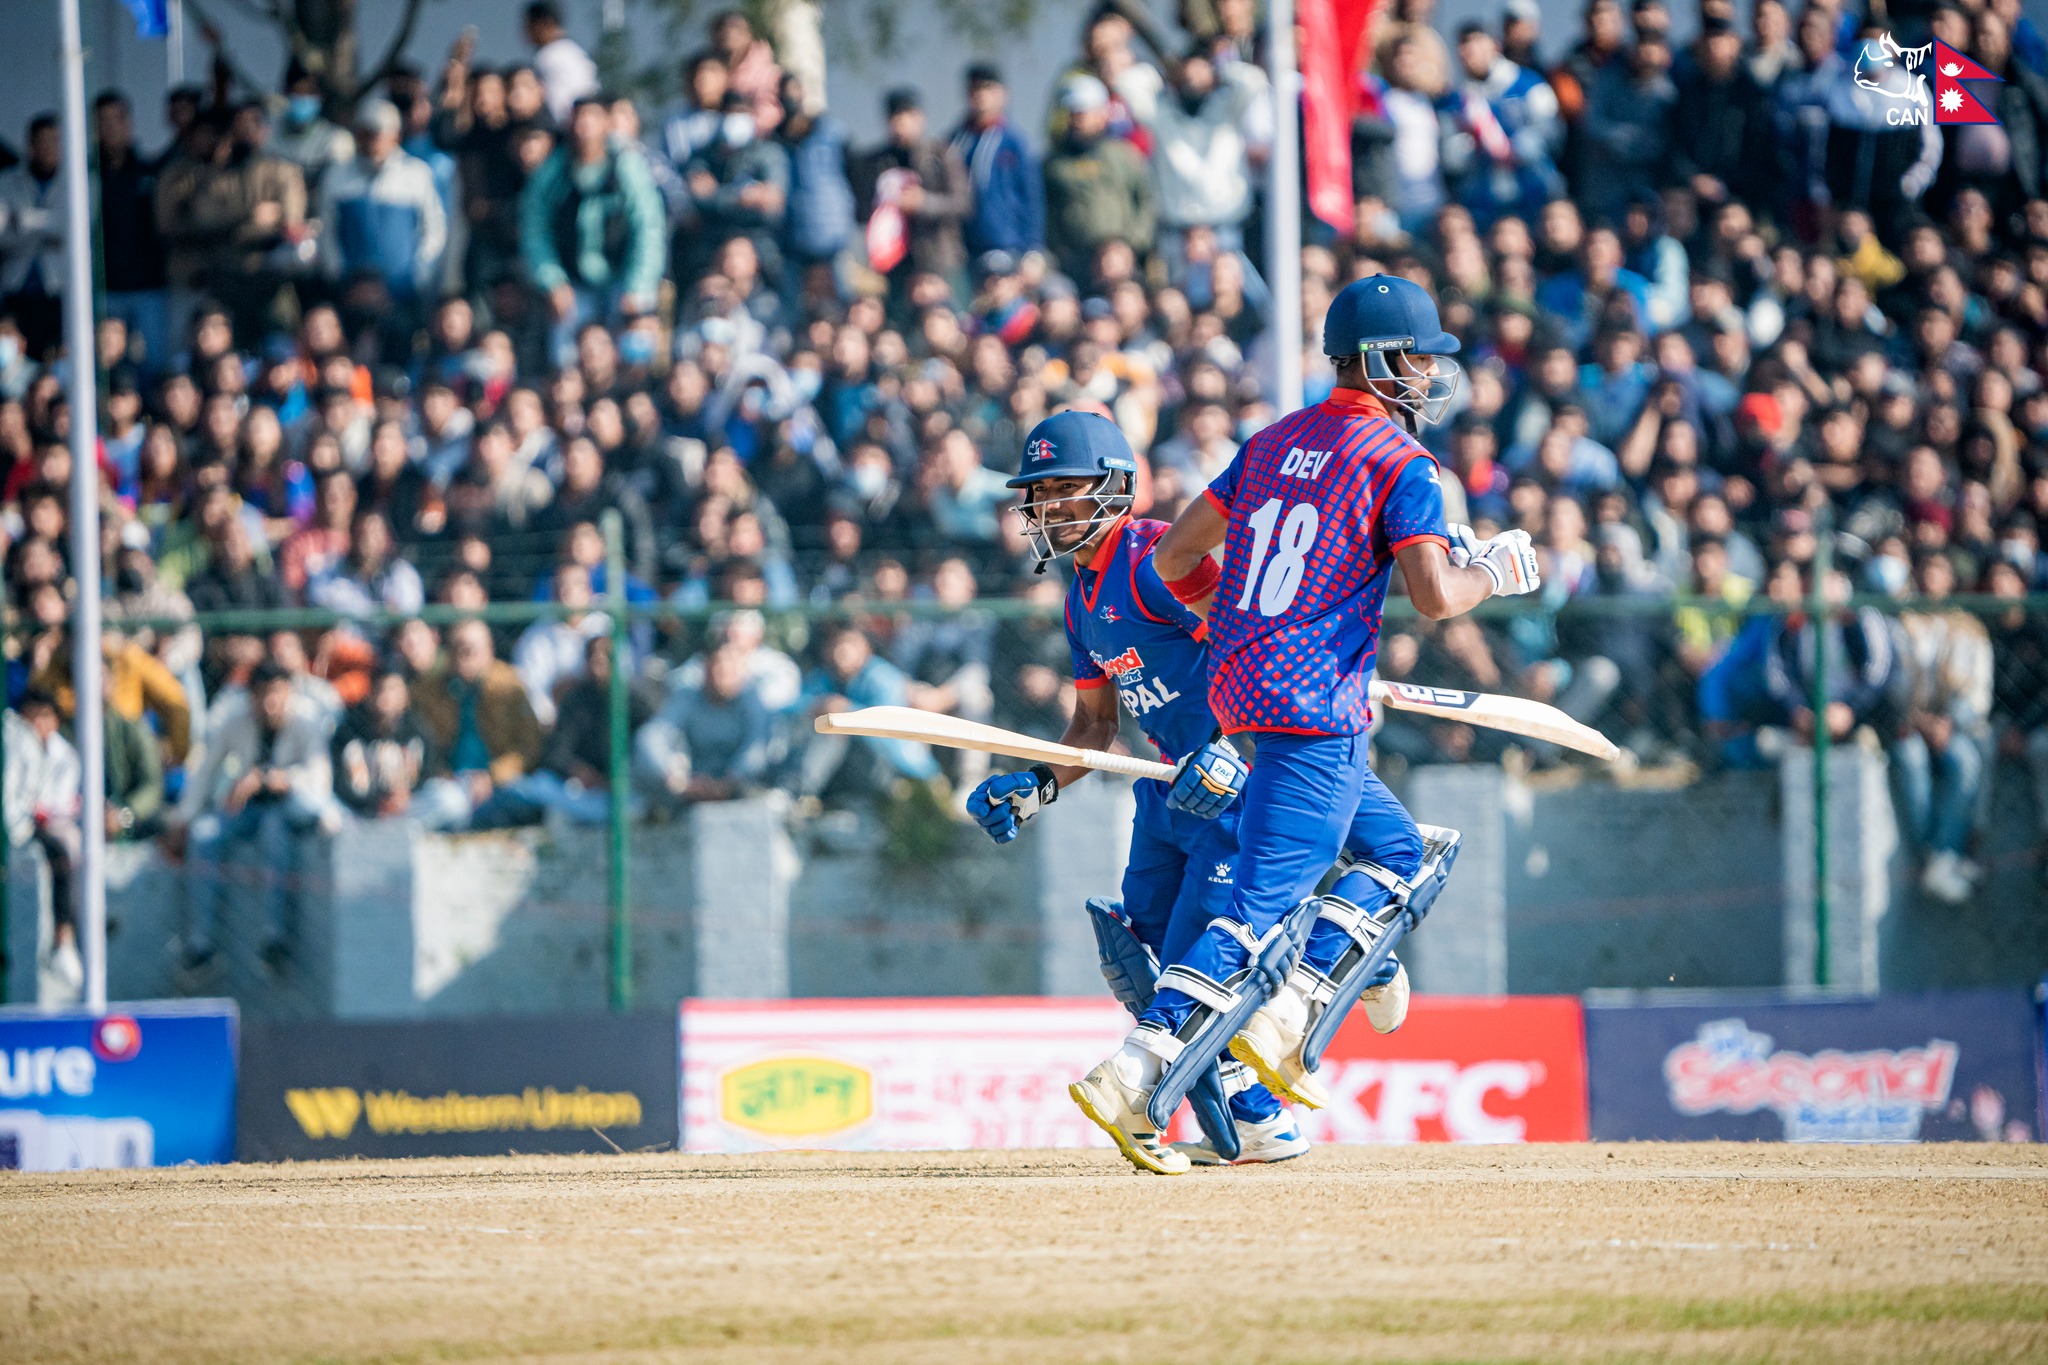 Nepal beats Canada in second ODI to clinch series